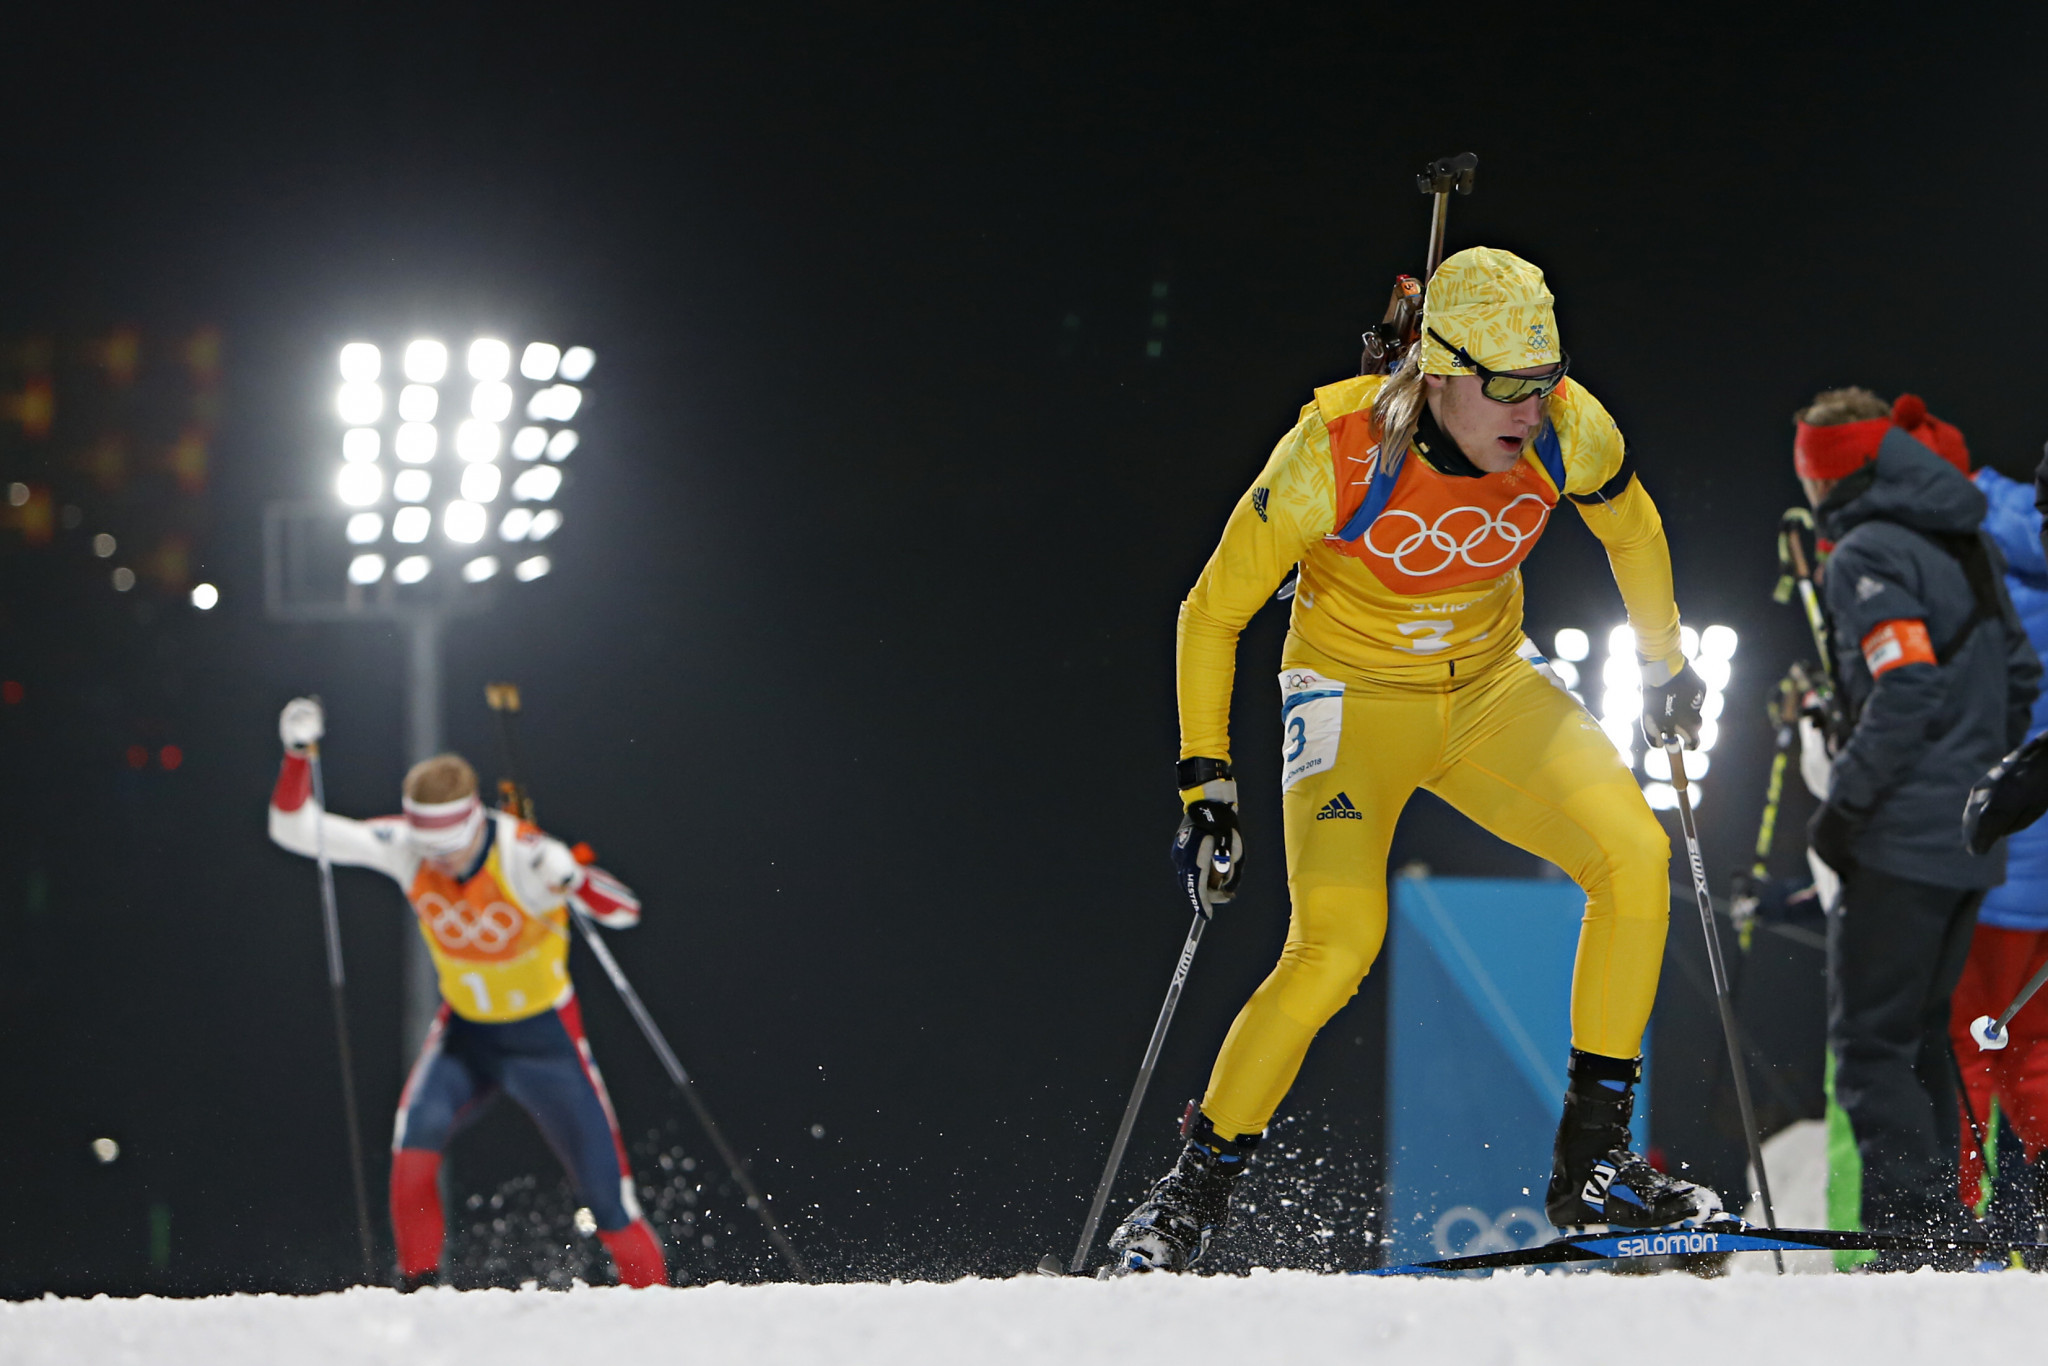 Sweden's Sebastian Samuelsson, winner of the silver medal in the men's 12.5km pursuit at Pyeongchang 2018, admitted he was 